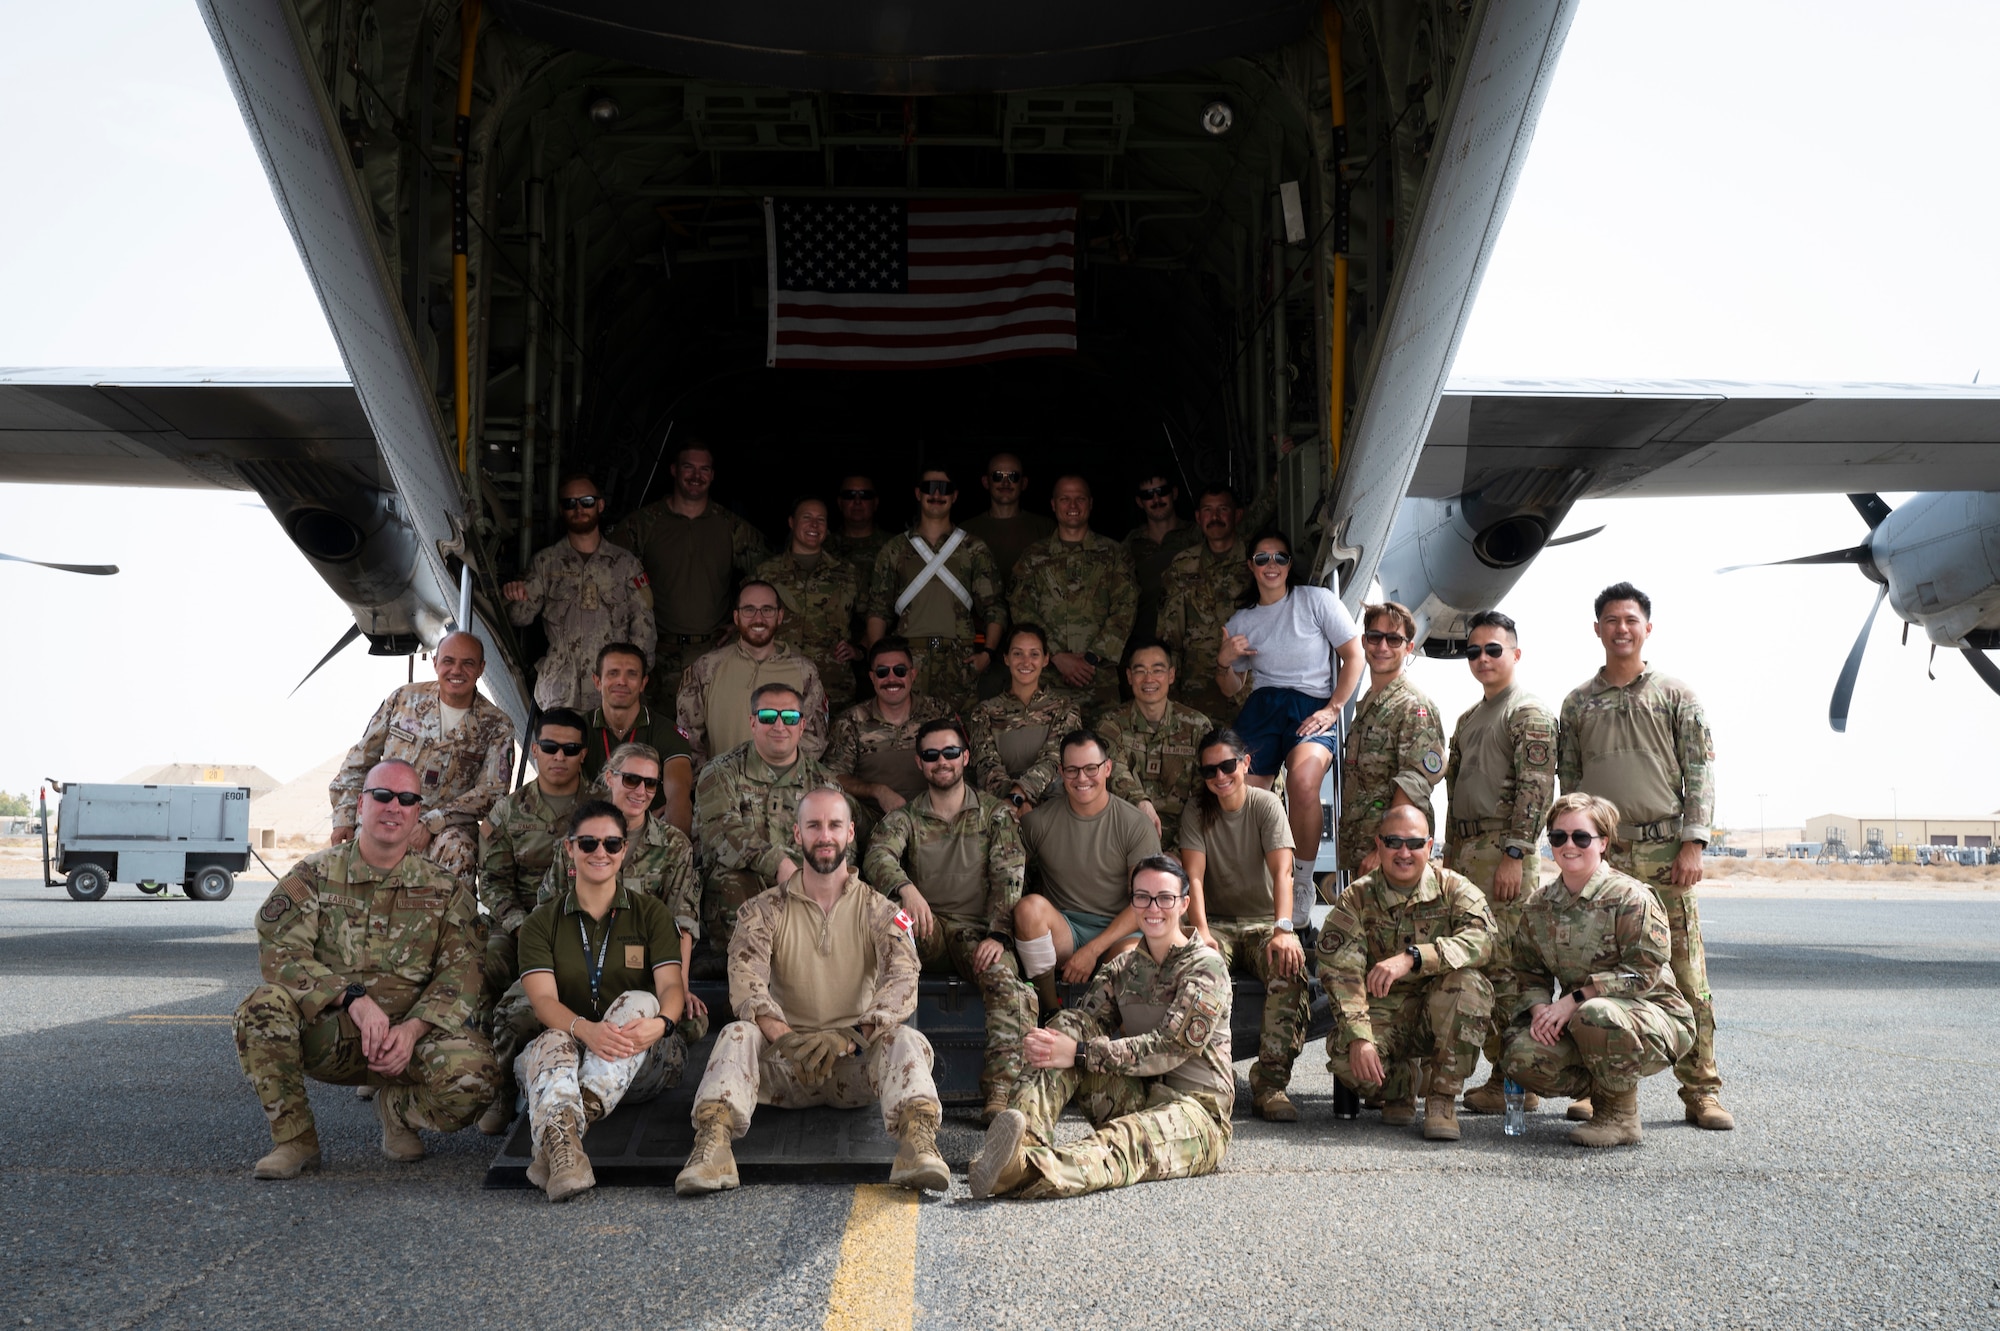 Military personnel from the U.S. Air Force, Canadian Armed Forces, Royal Danish Army and the Italian Air Force conducted medical evacuation training on a C-130J Super Hercules aircraft at Ali Al Salem Air Base, Kuwait, July 29, 2022. The training provided valuable insight to help increase the speed wounded service members can be moved to higher echelon of care while also improving safety of medical members and patients. (U.S. Air Force photo by Staff Sgt. Dalton Williams)